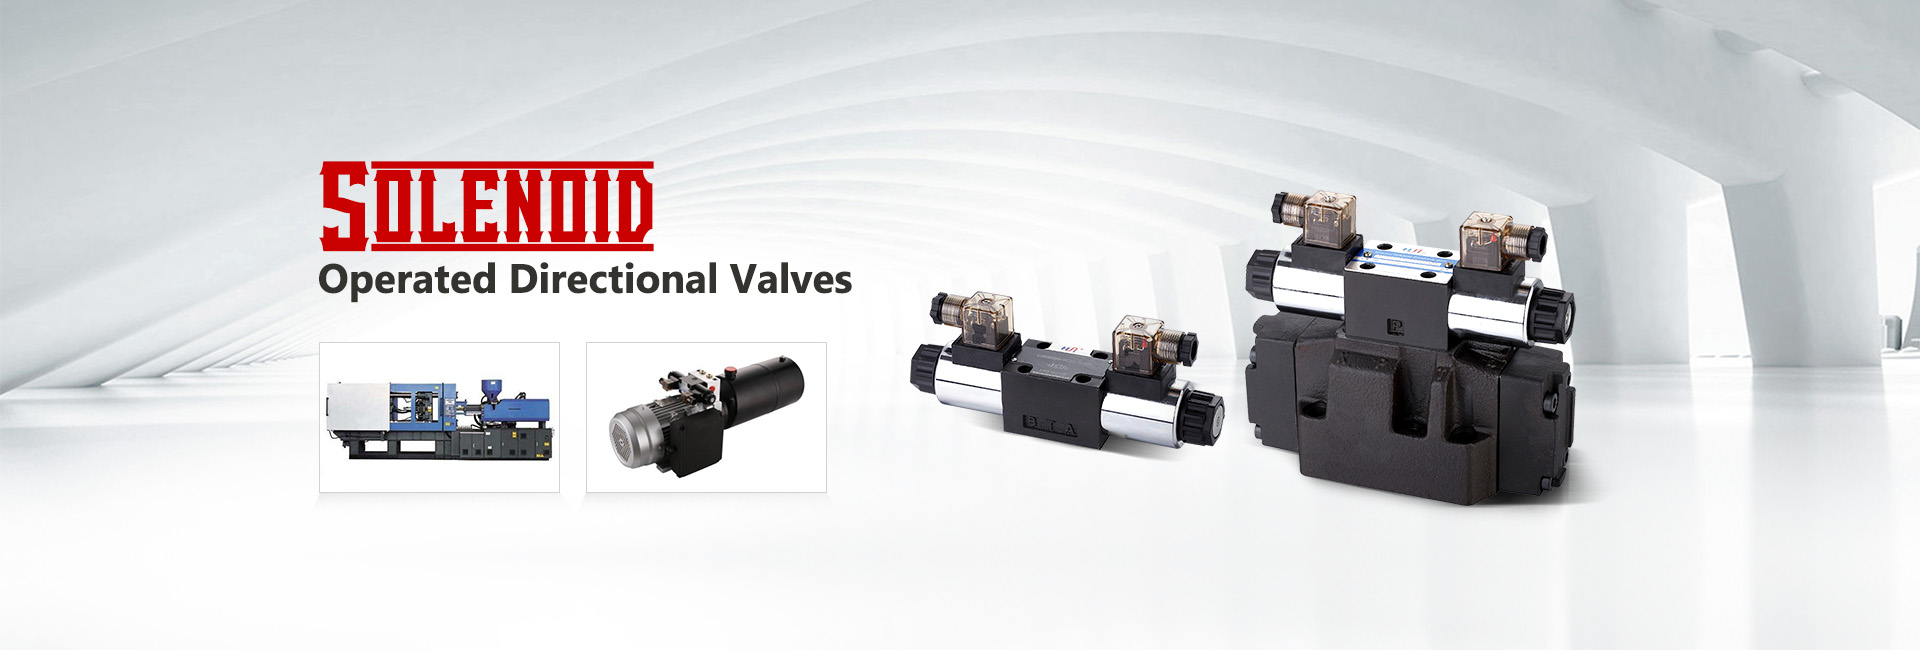 I-Solenid Operated Directional Valves